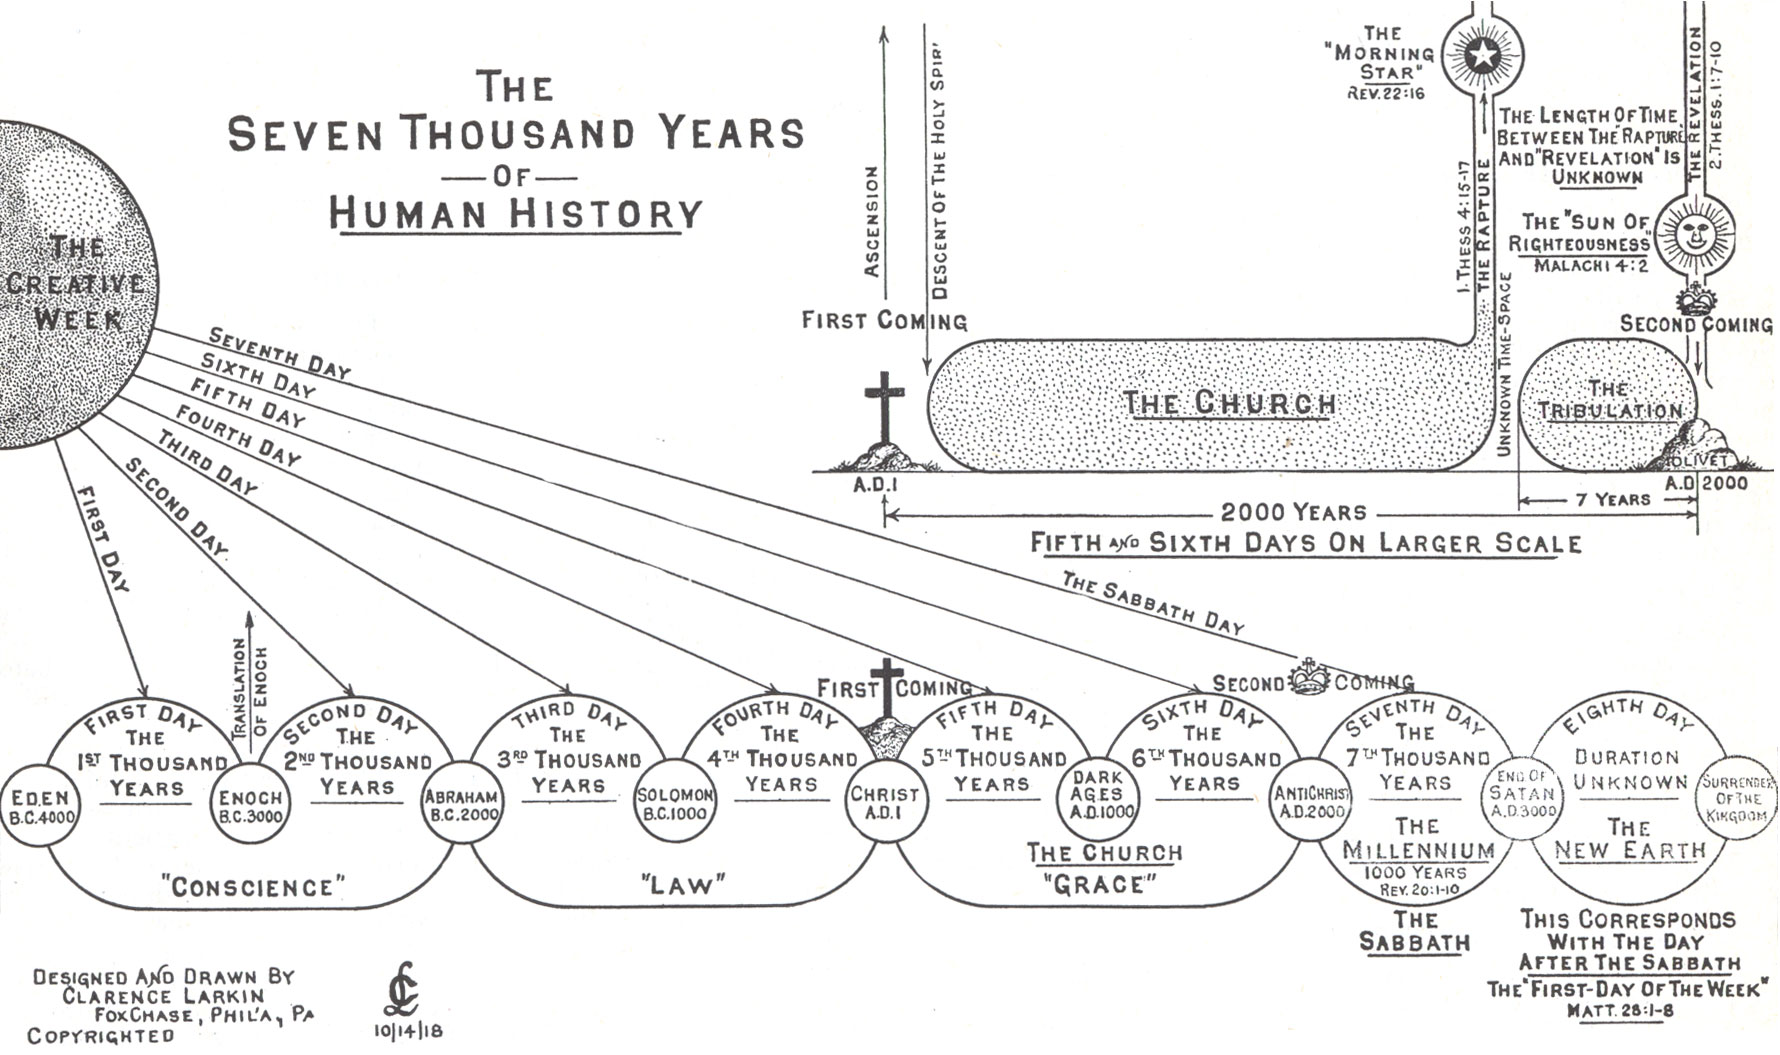 The Seven Thousand Years of Human History Illustration by Clarence Larkin